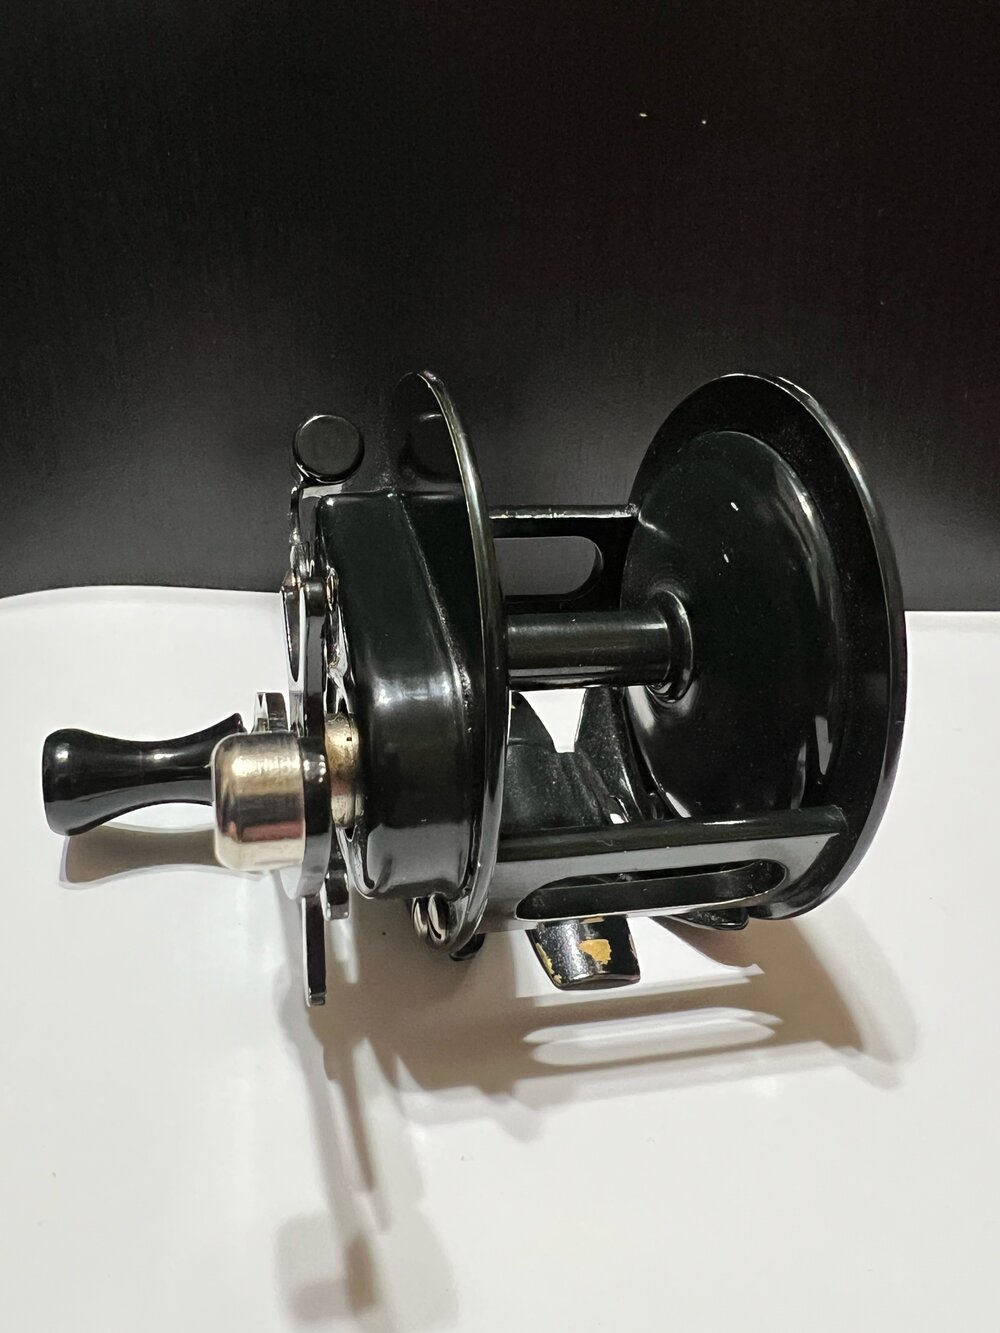 Clarkson Co. CASTEY Trolling or Casting Reel with Rare Original